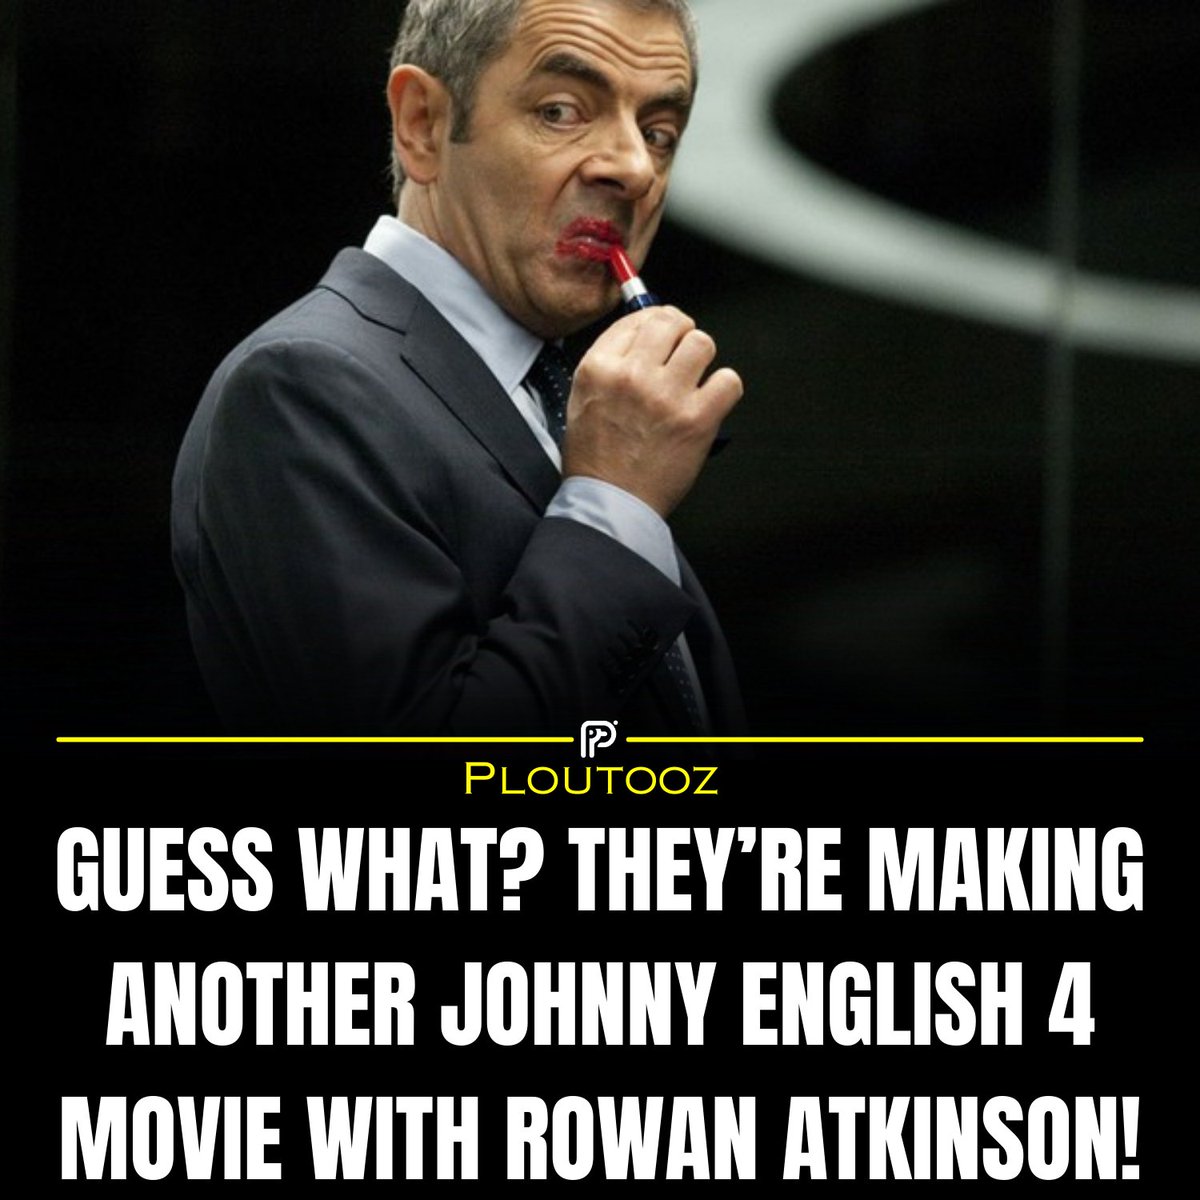 You won’t believe this. The hilarious Johnny English is back for the fourth time with Rowan Atkinson! 😂🕵️🍿
#johnnyenglish #rowanatkinson #comedy #viral #ploutooz